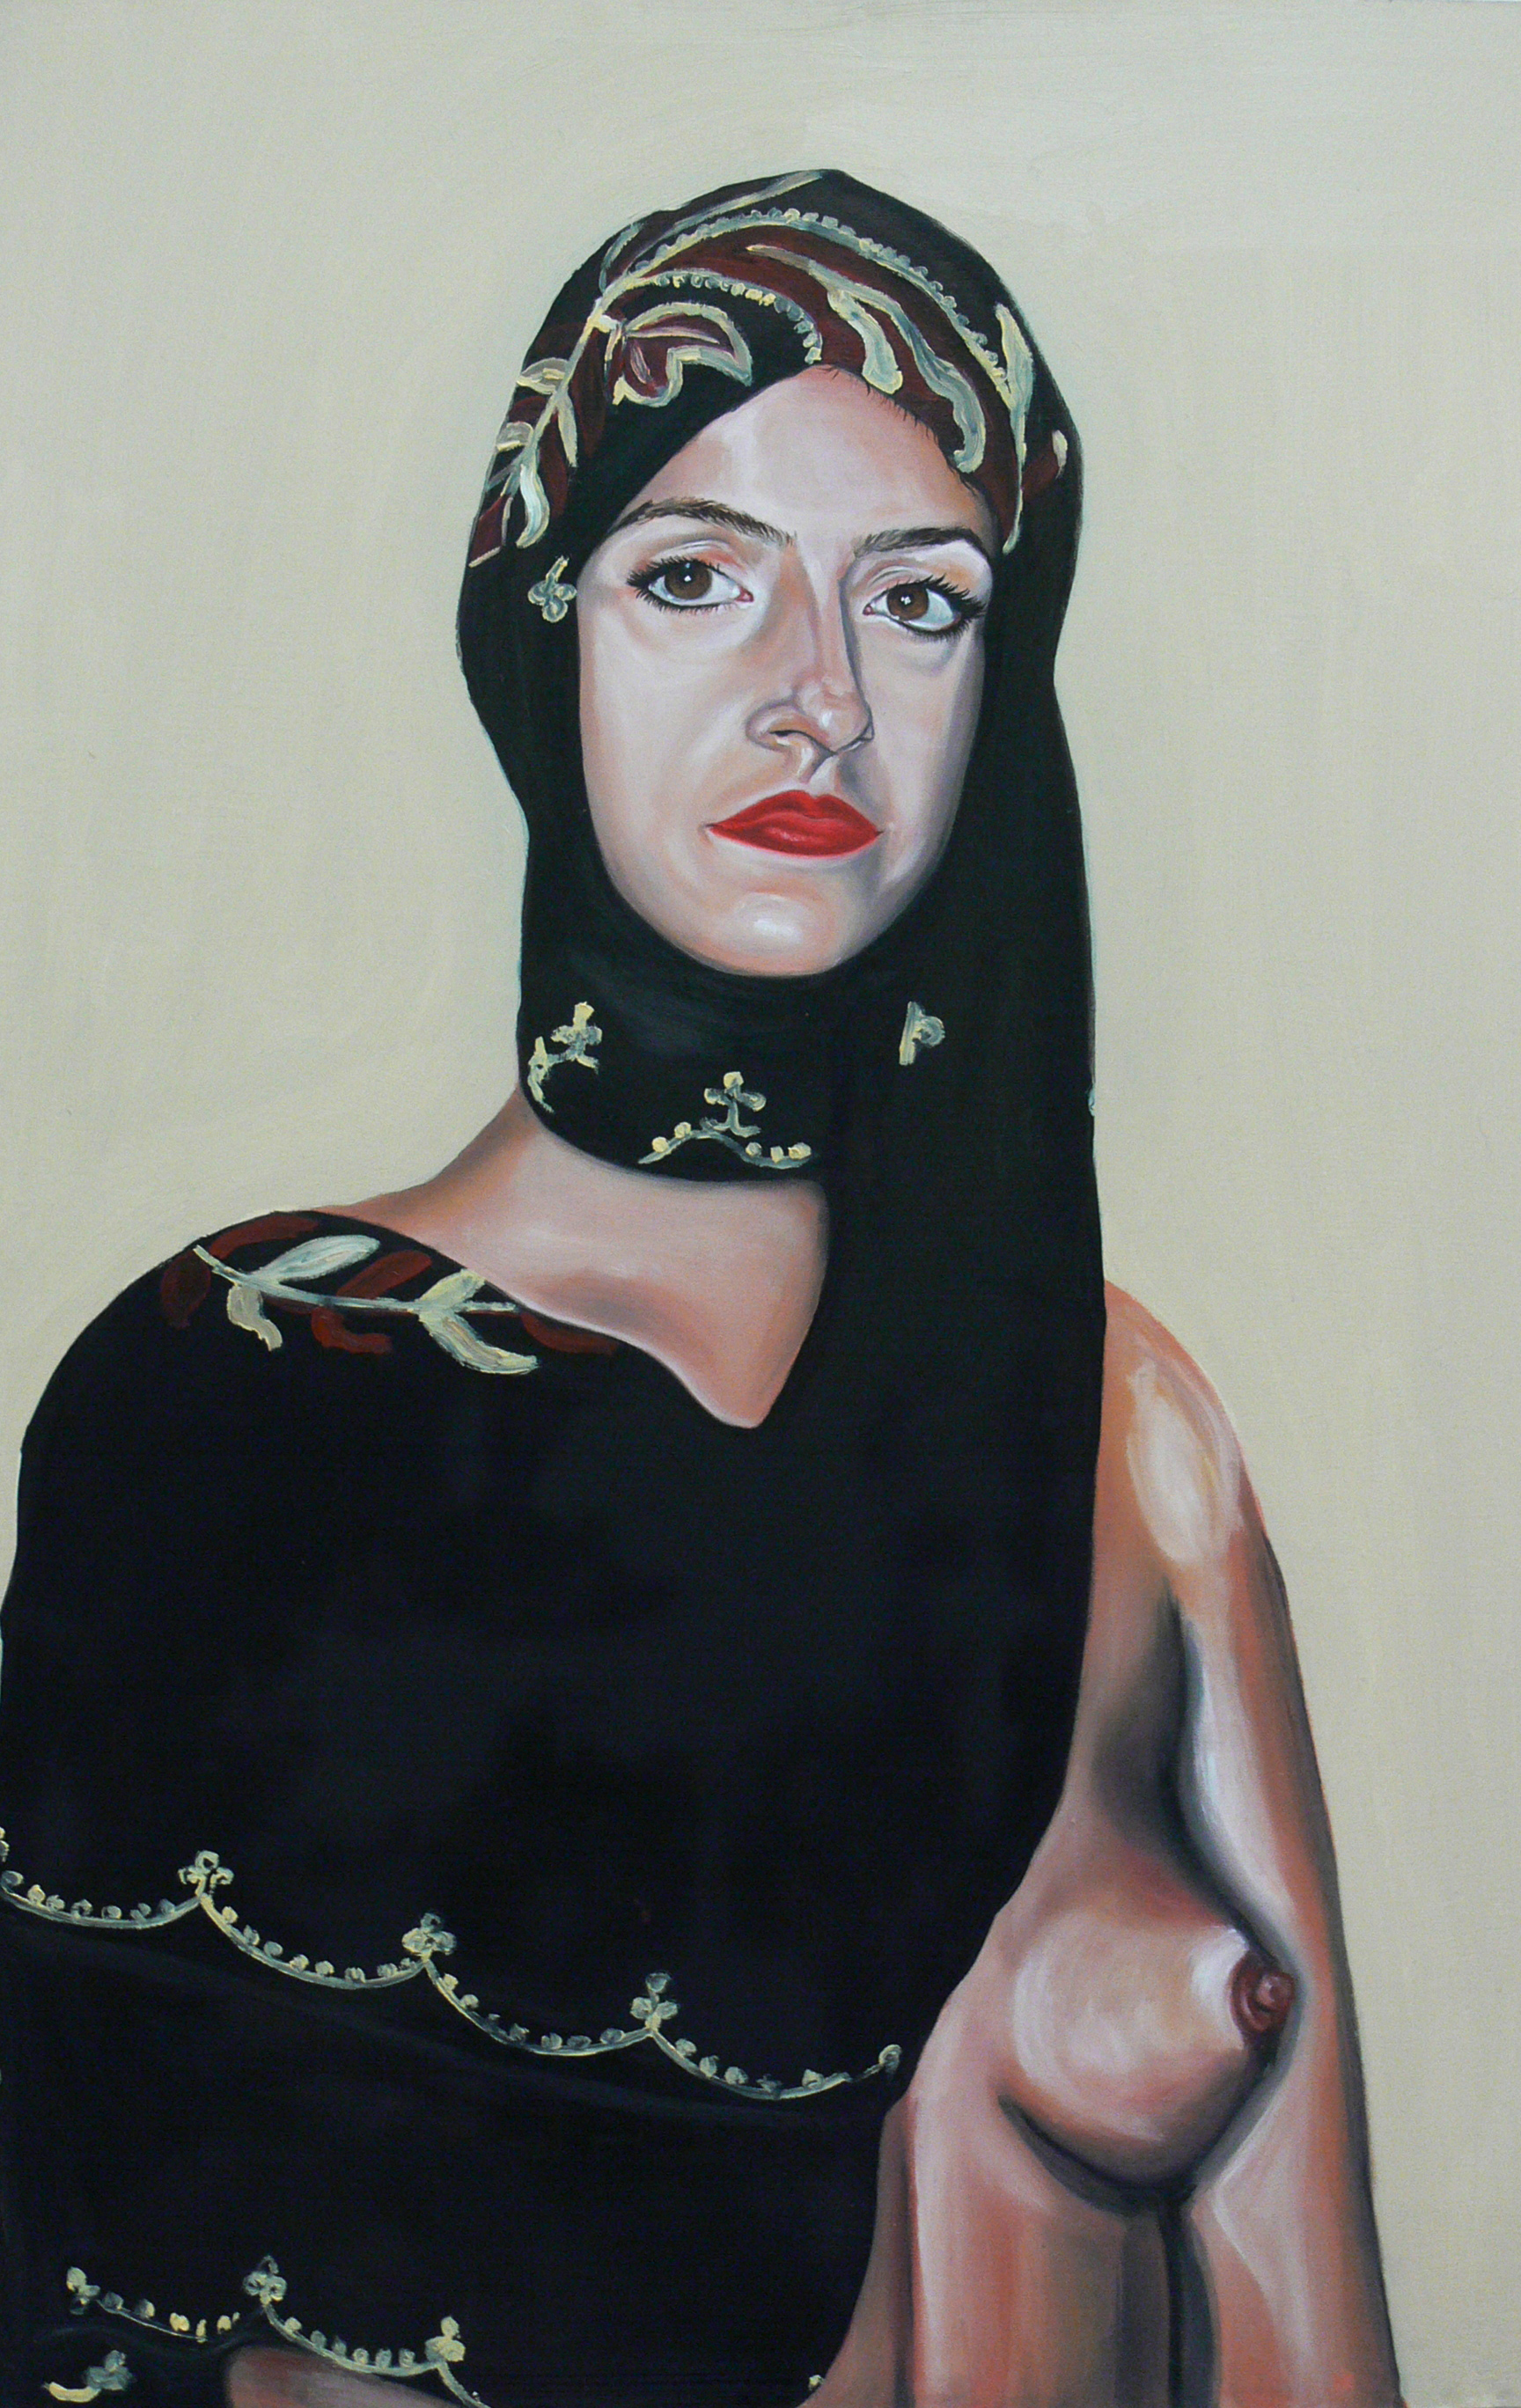 Self-Portrait with my Mother's Headscarf and Breast of Kate Moss 